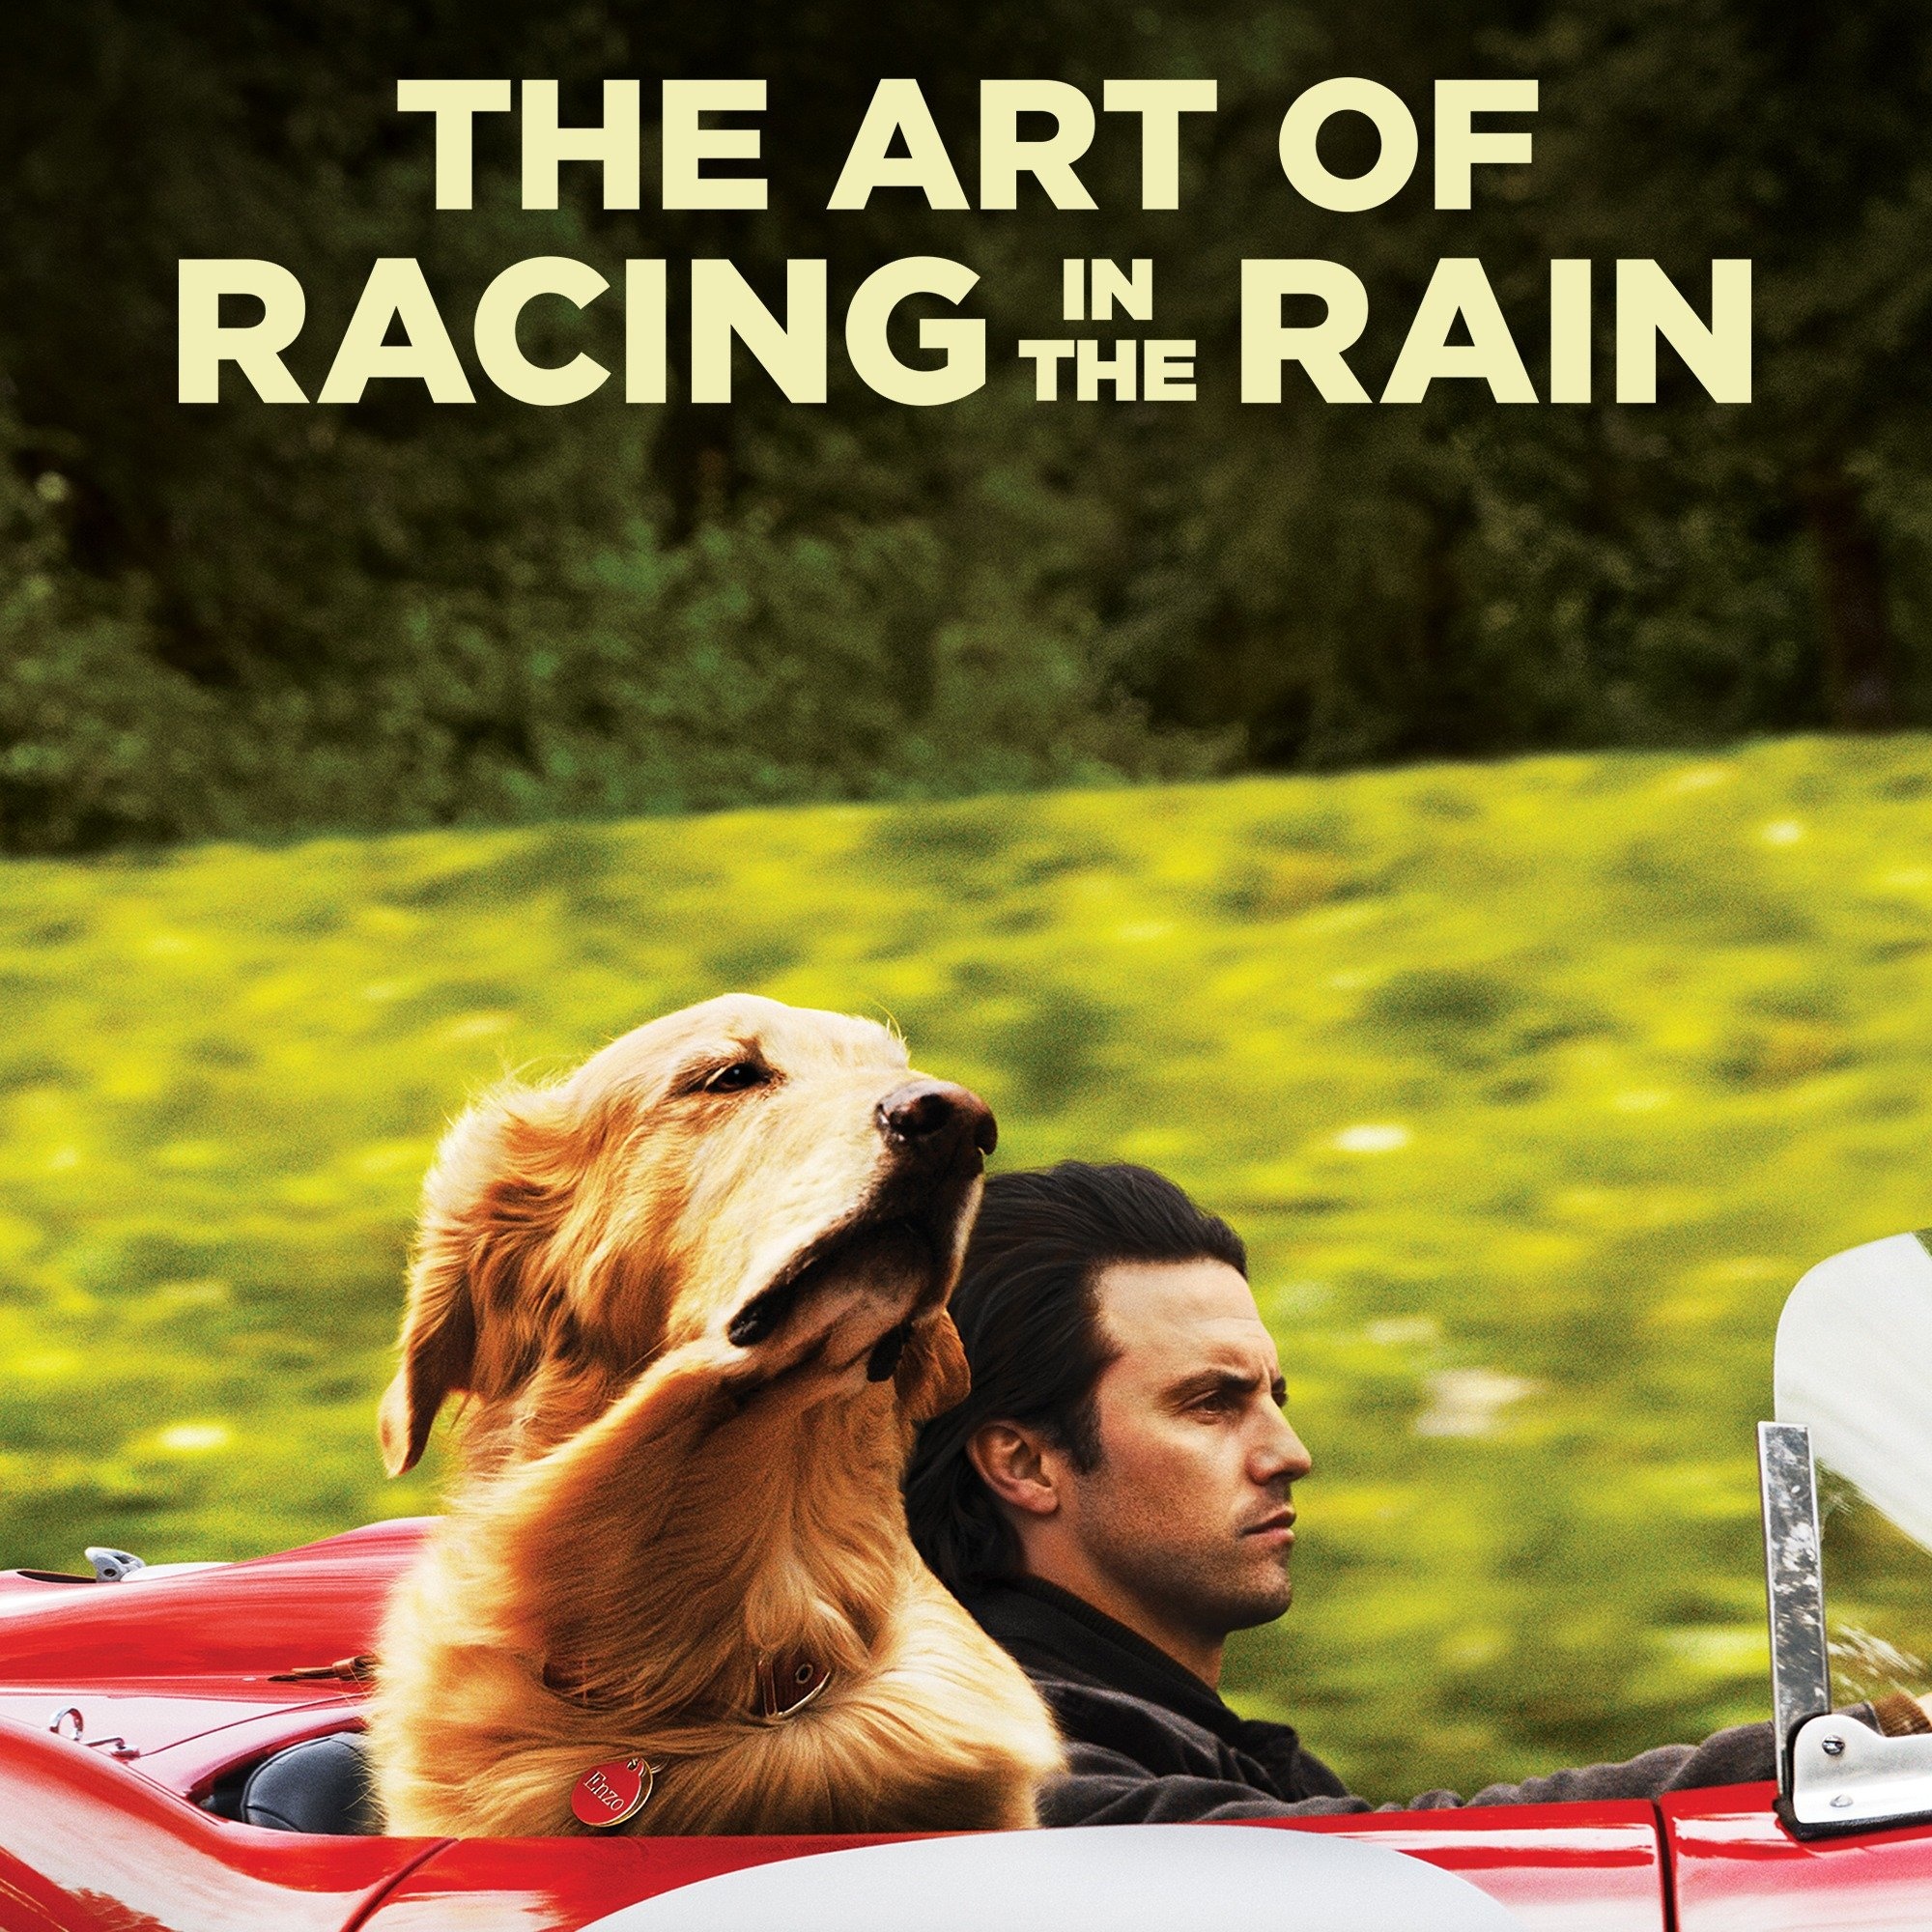 Art of Racing in the Rain, Full movie online, Plex streaming, Captivating story, 2000x2000 HD Phone